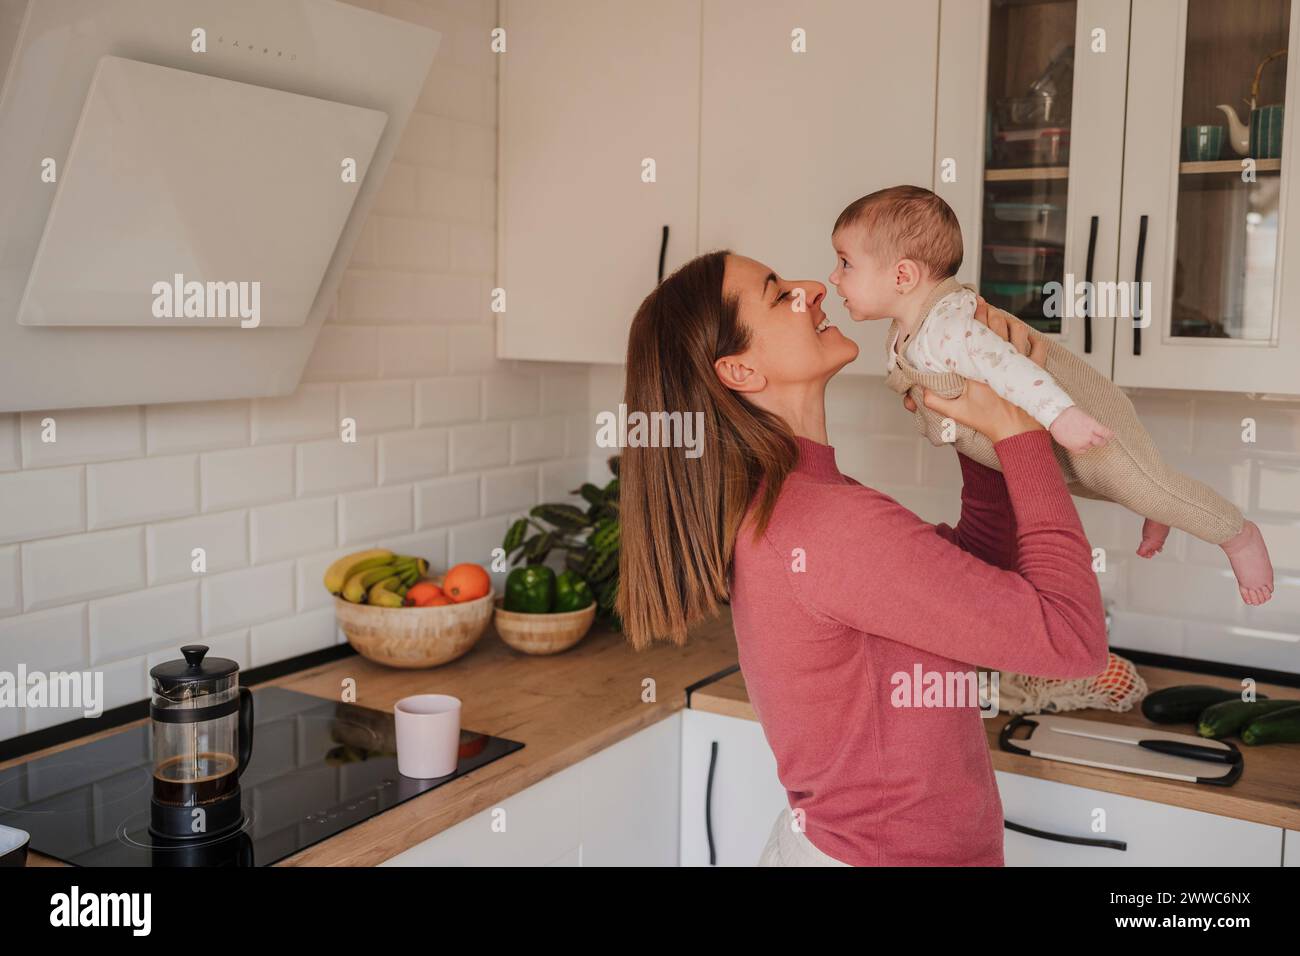 Smiling mother embracing and playing with baby daughter in kitchen Stock Photo